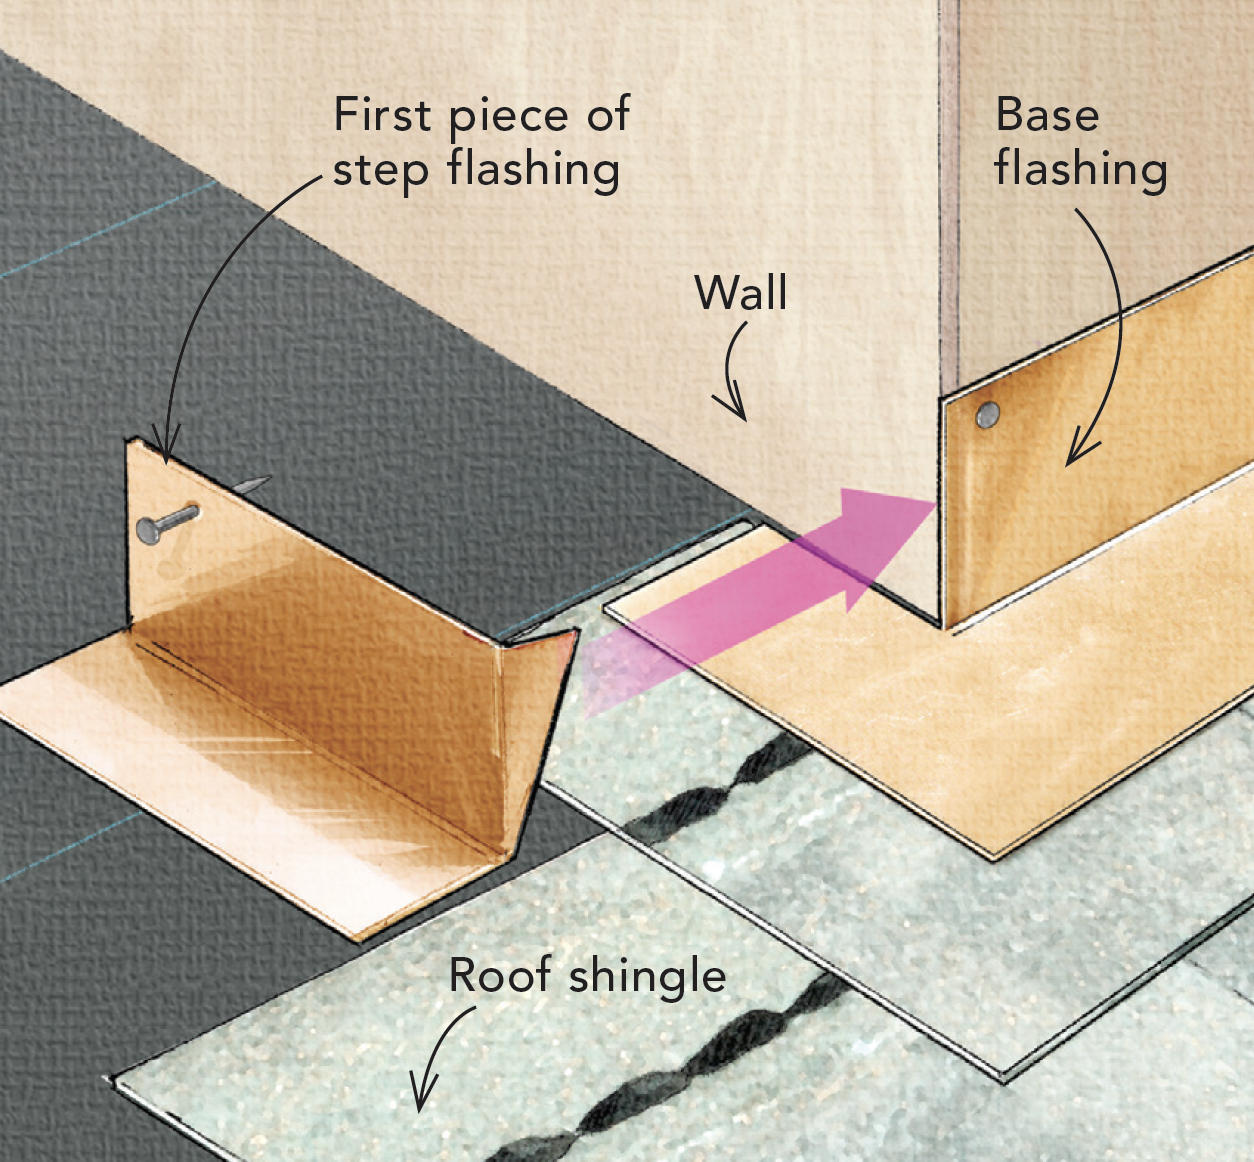 Step flashing comes first diagram